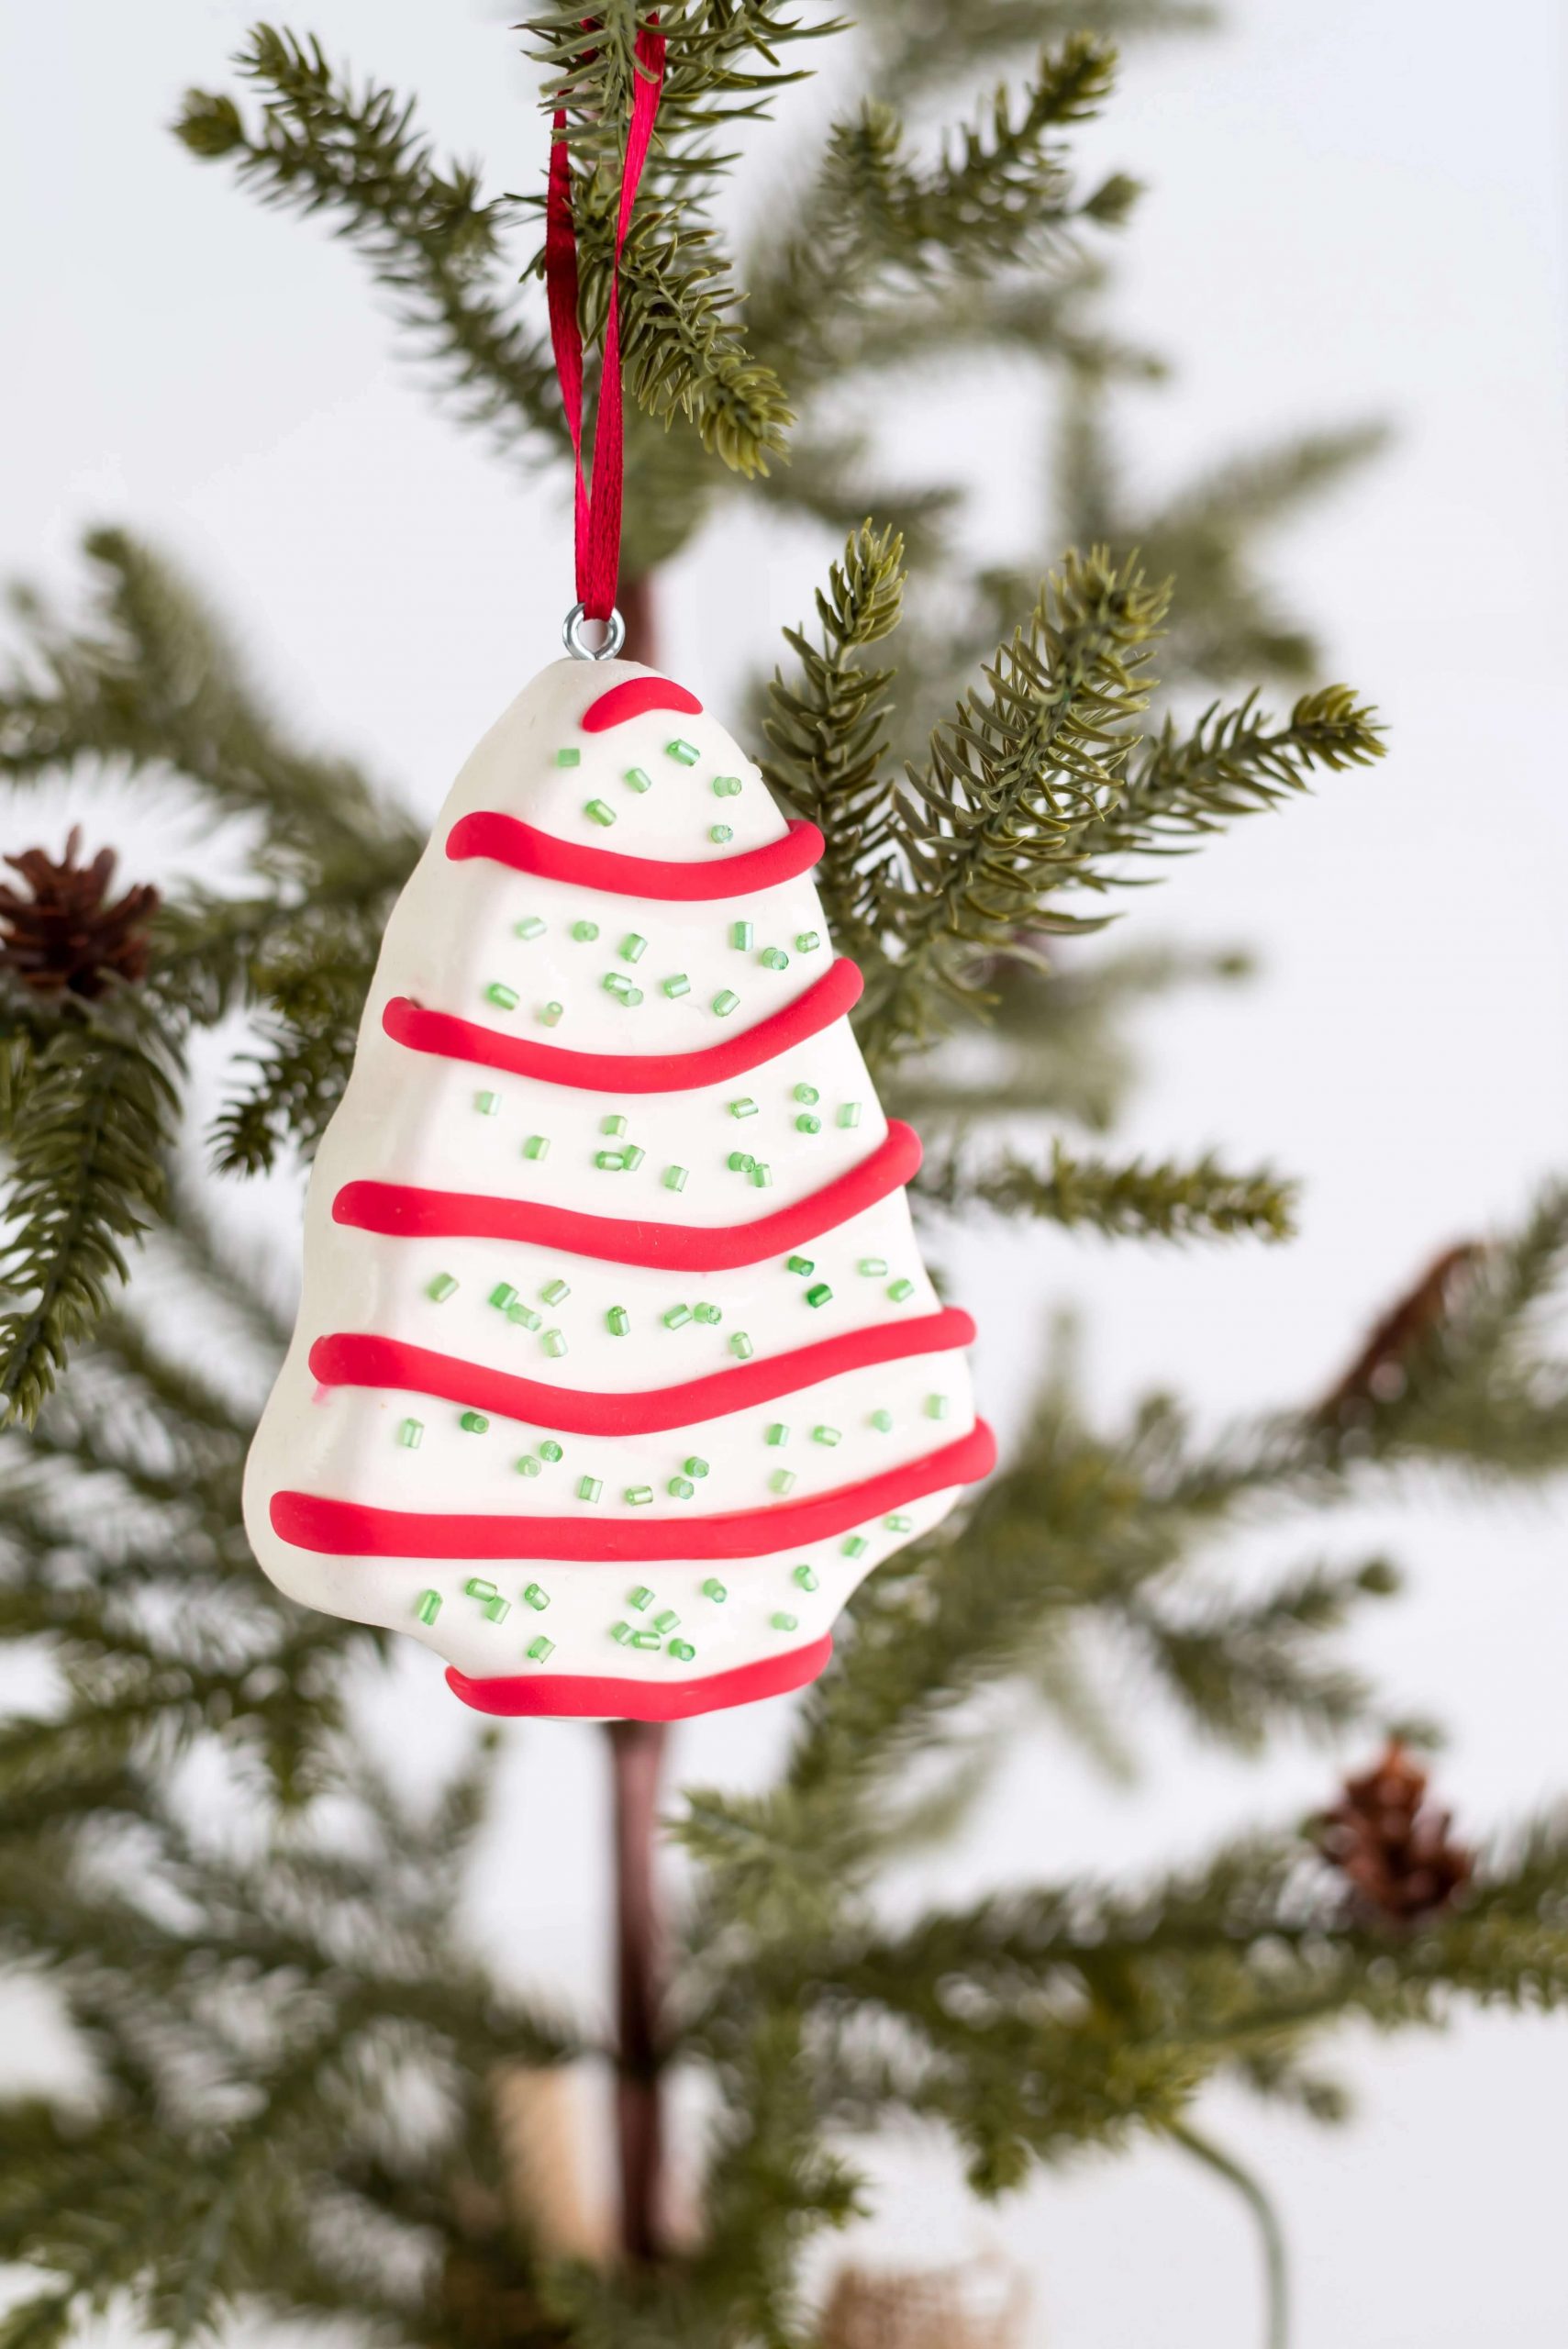 Handmade Tree Ornament Using Clay For Decoration